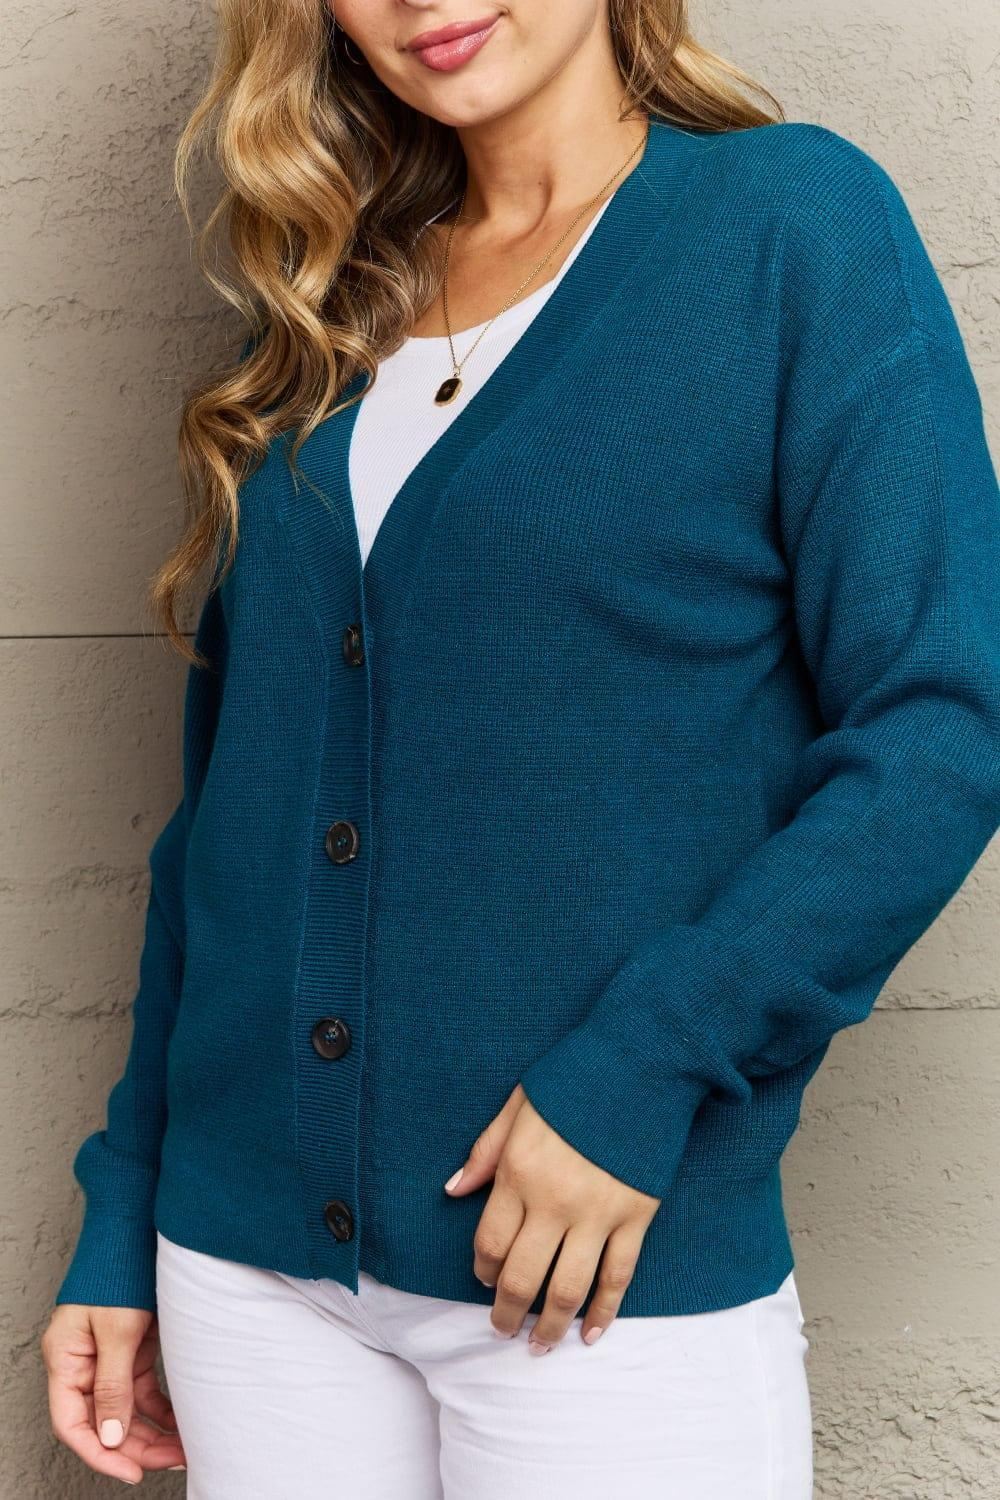 Kiss Me Tonight Button Down Cardigan - Teal - Inspired Eye Boutique